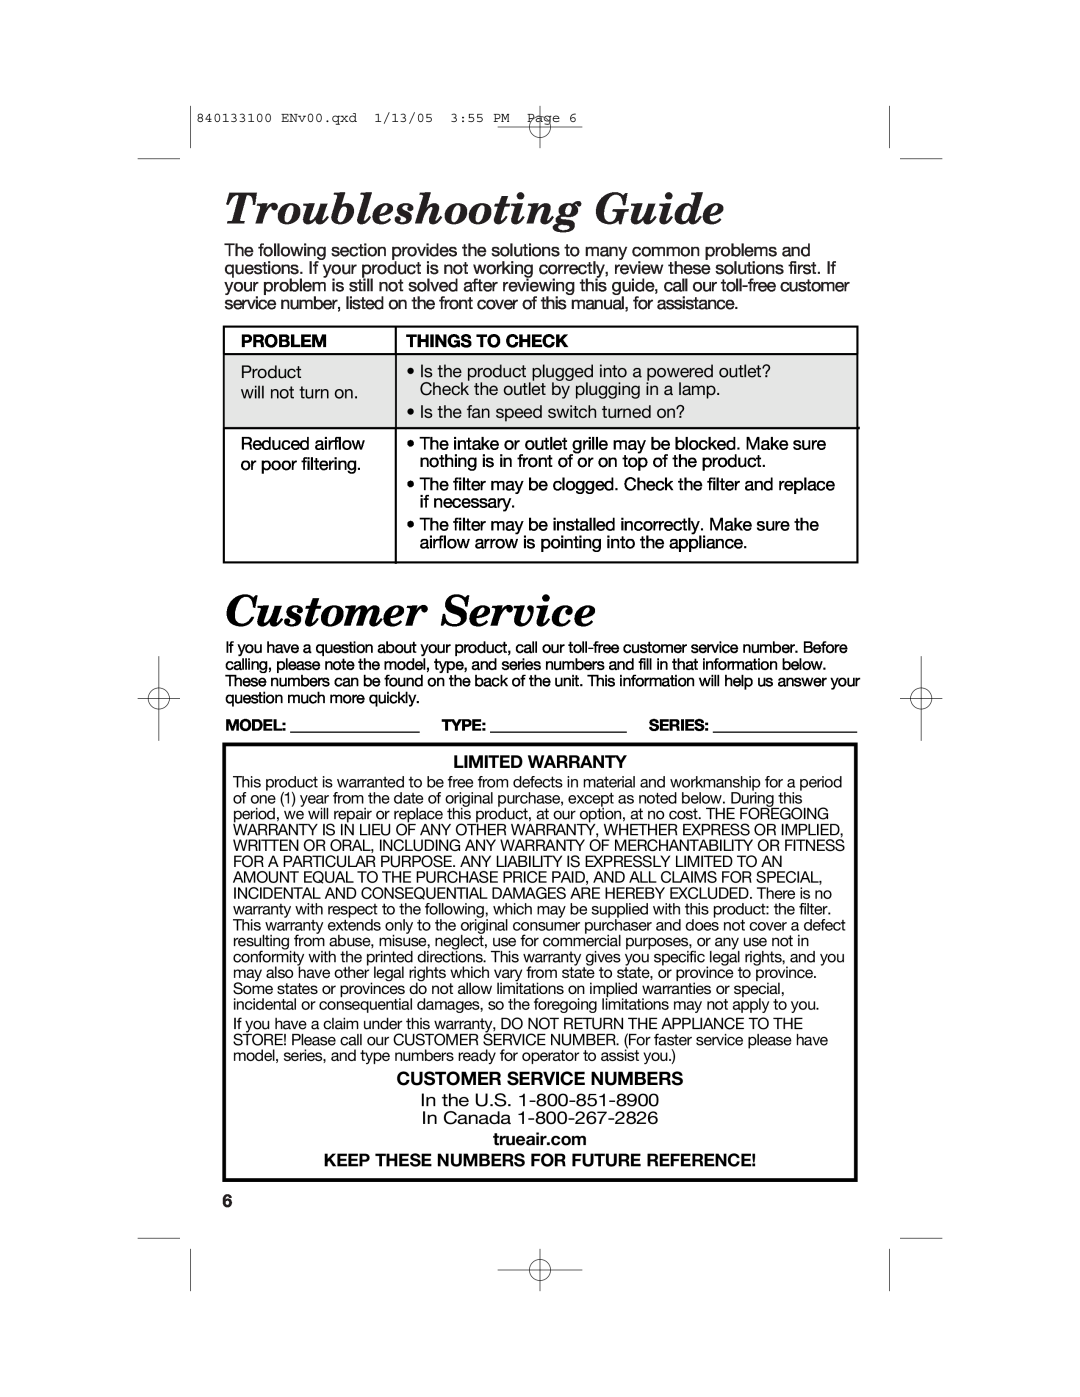 Hamilton Beach HEPA manual Troubleshooting Guide, Customer Service Numbers, Problem, Things To Check, Limited Warranty 